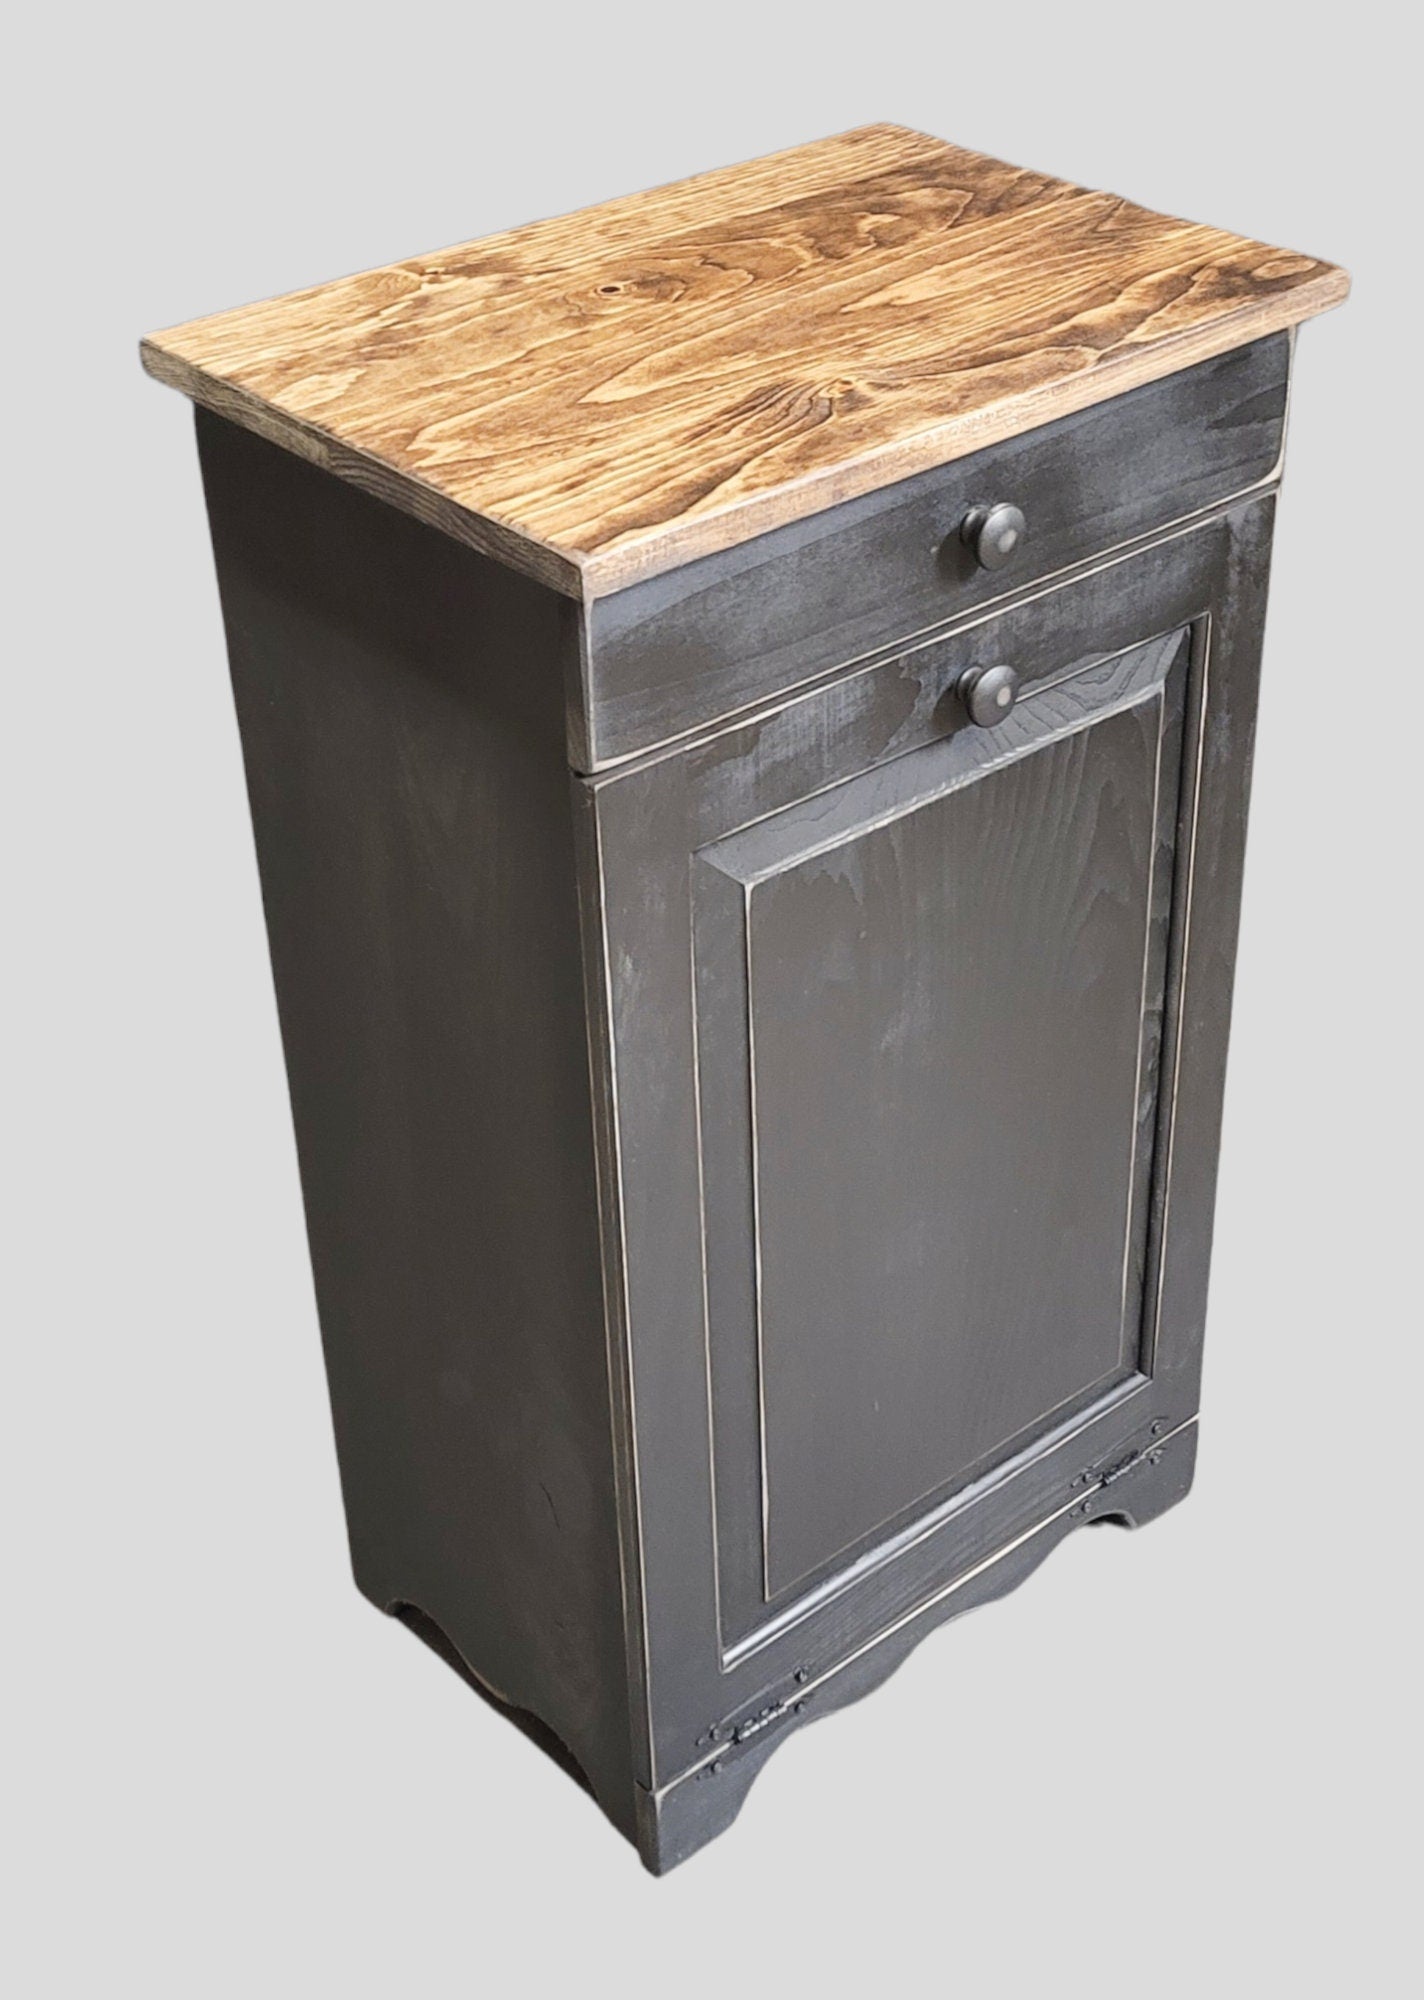 Tilt out rustic trash bin / tilt out laundry bin / Farmhouse style trash can / Wooden flip out trash can / Rustic kitchen garbage can